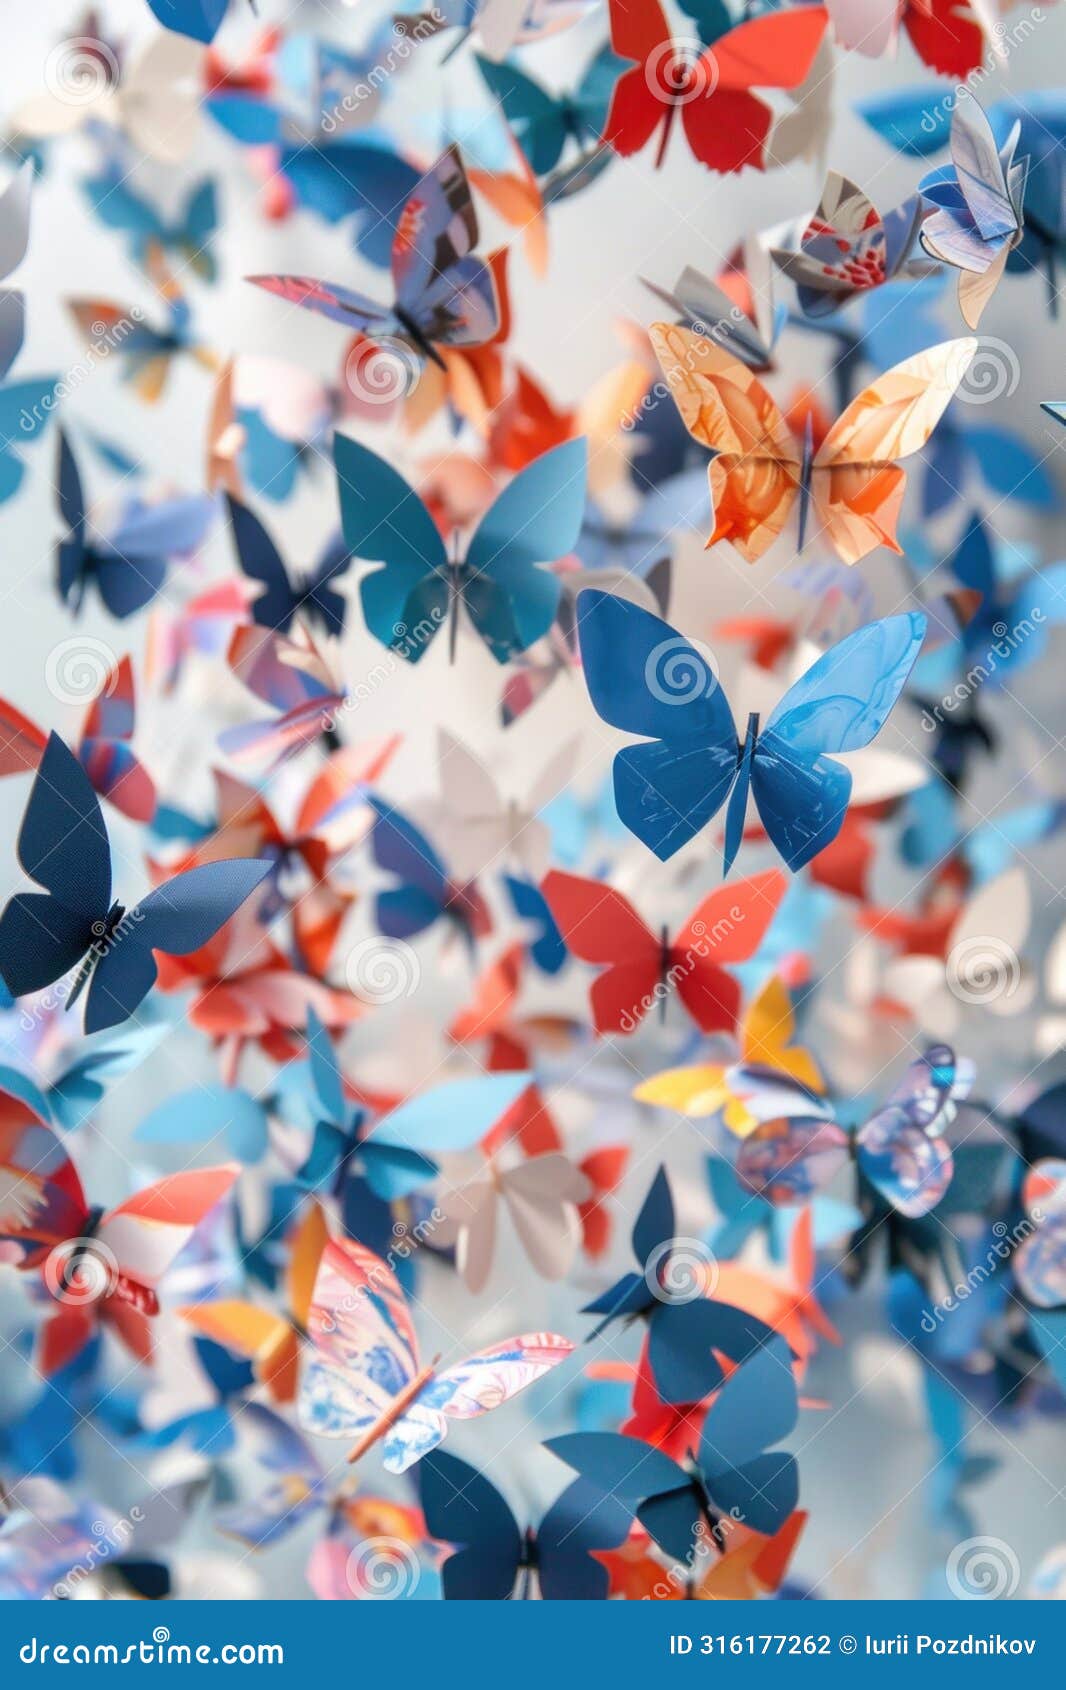 a swarm of paper butterflies flutter in the air, creating a beautiful pattern